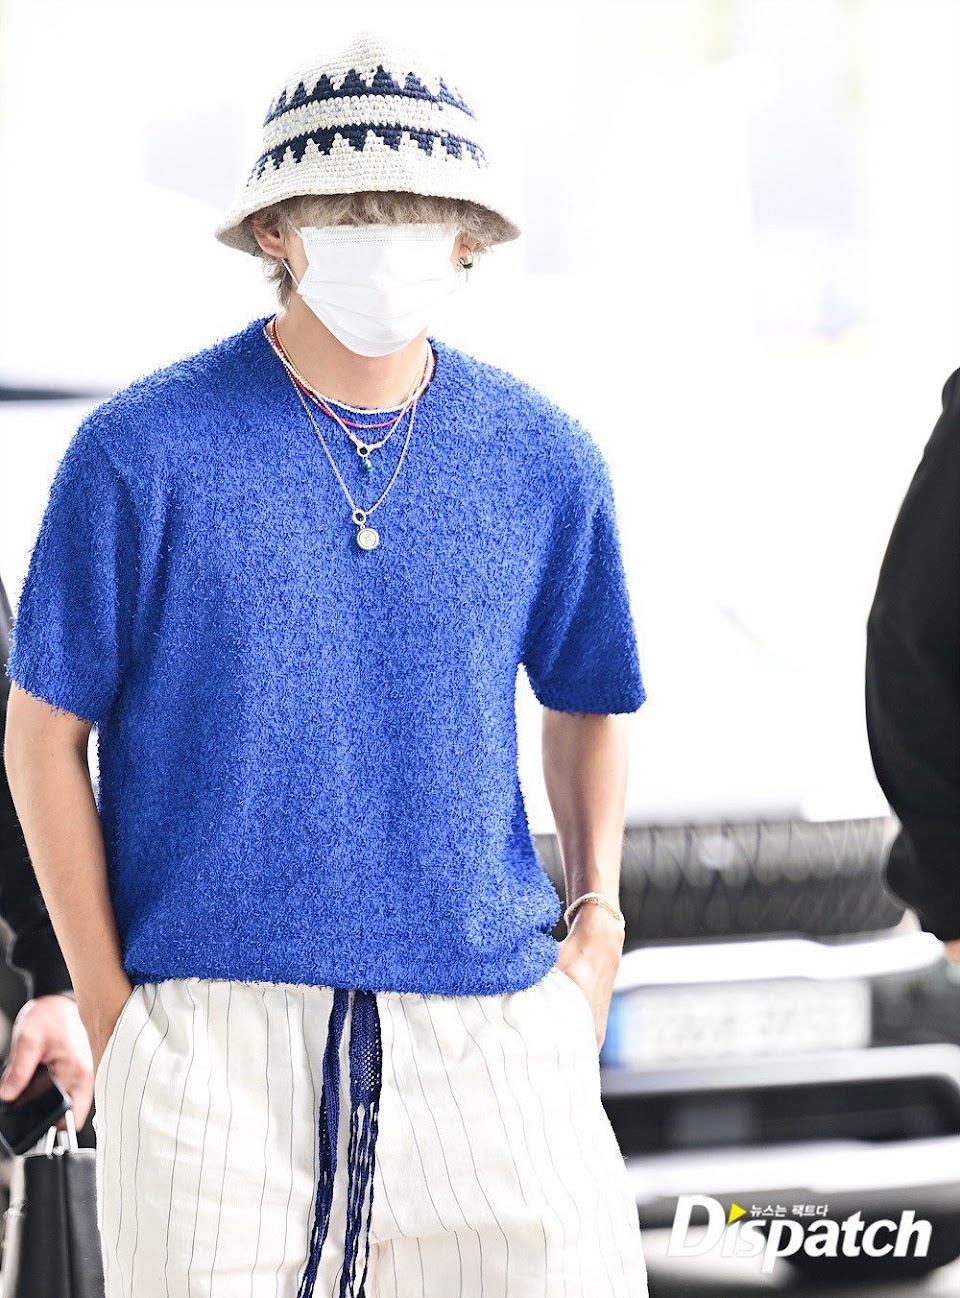 BTS Jungkook's airport fashion timeline, see pics